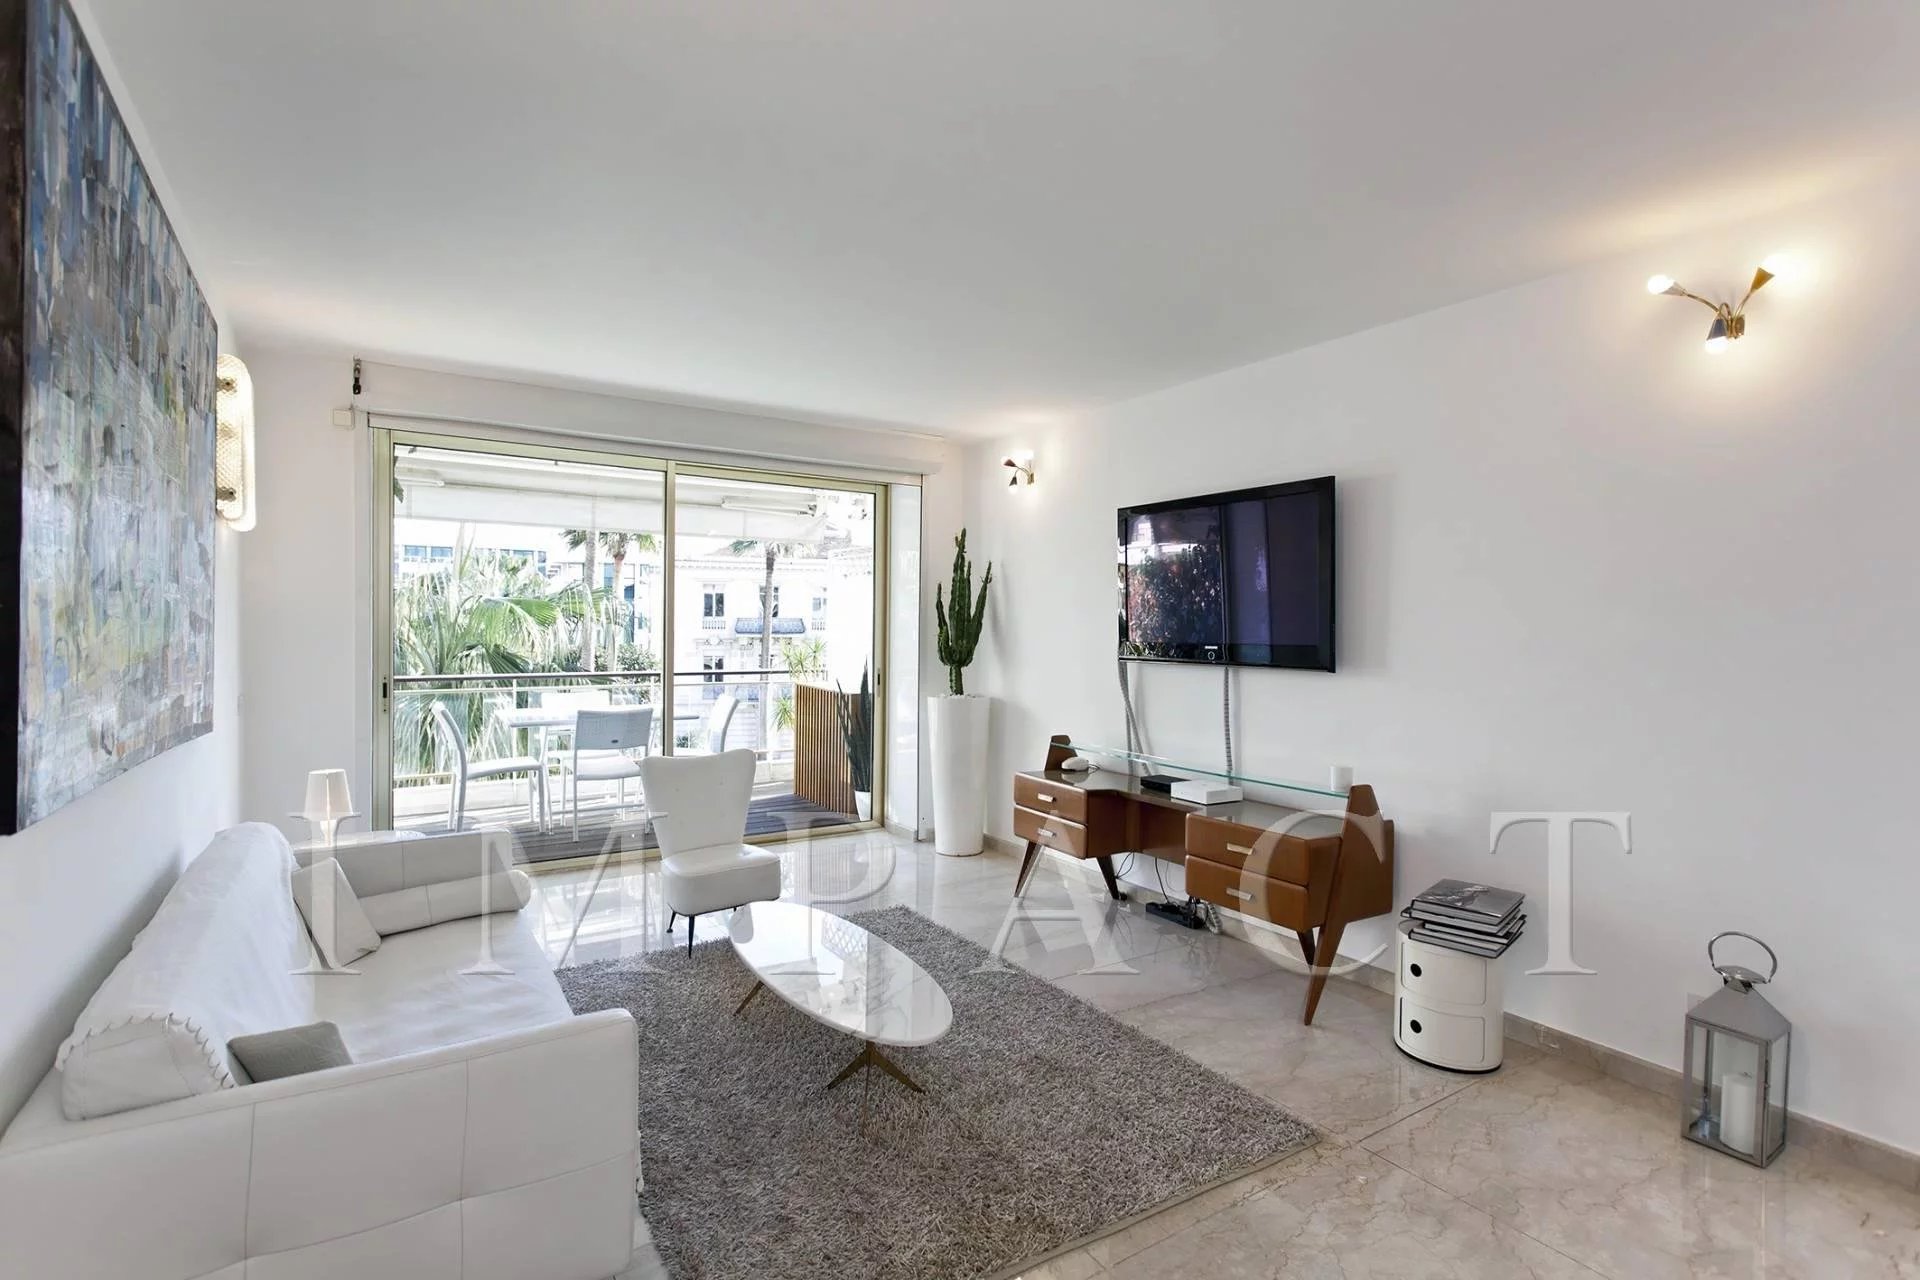 Apartment to rent Cannes center.